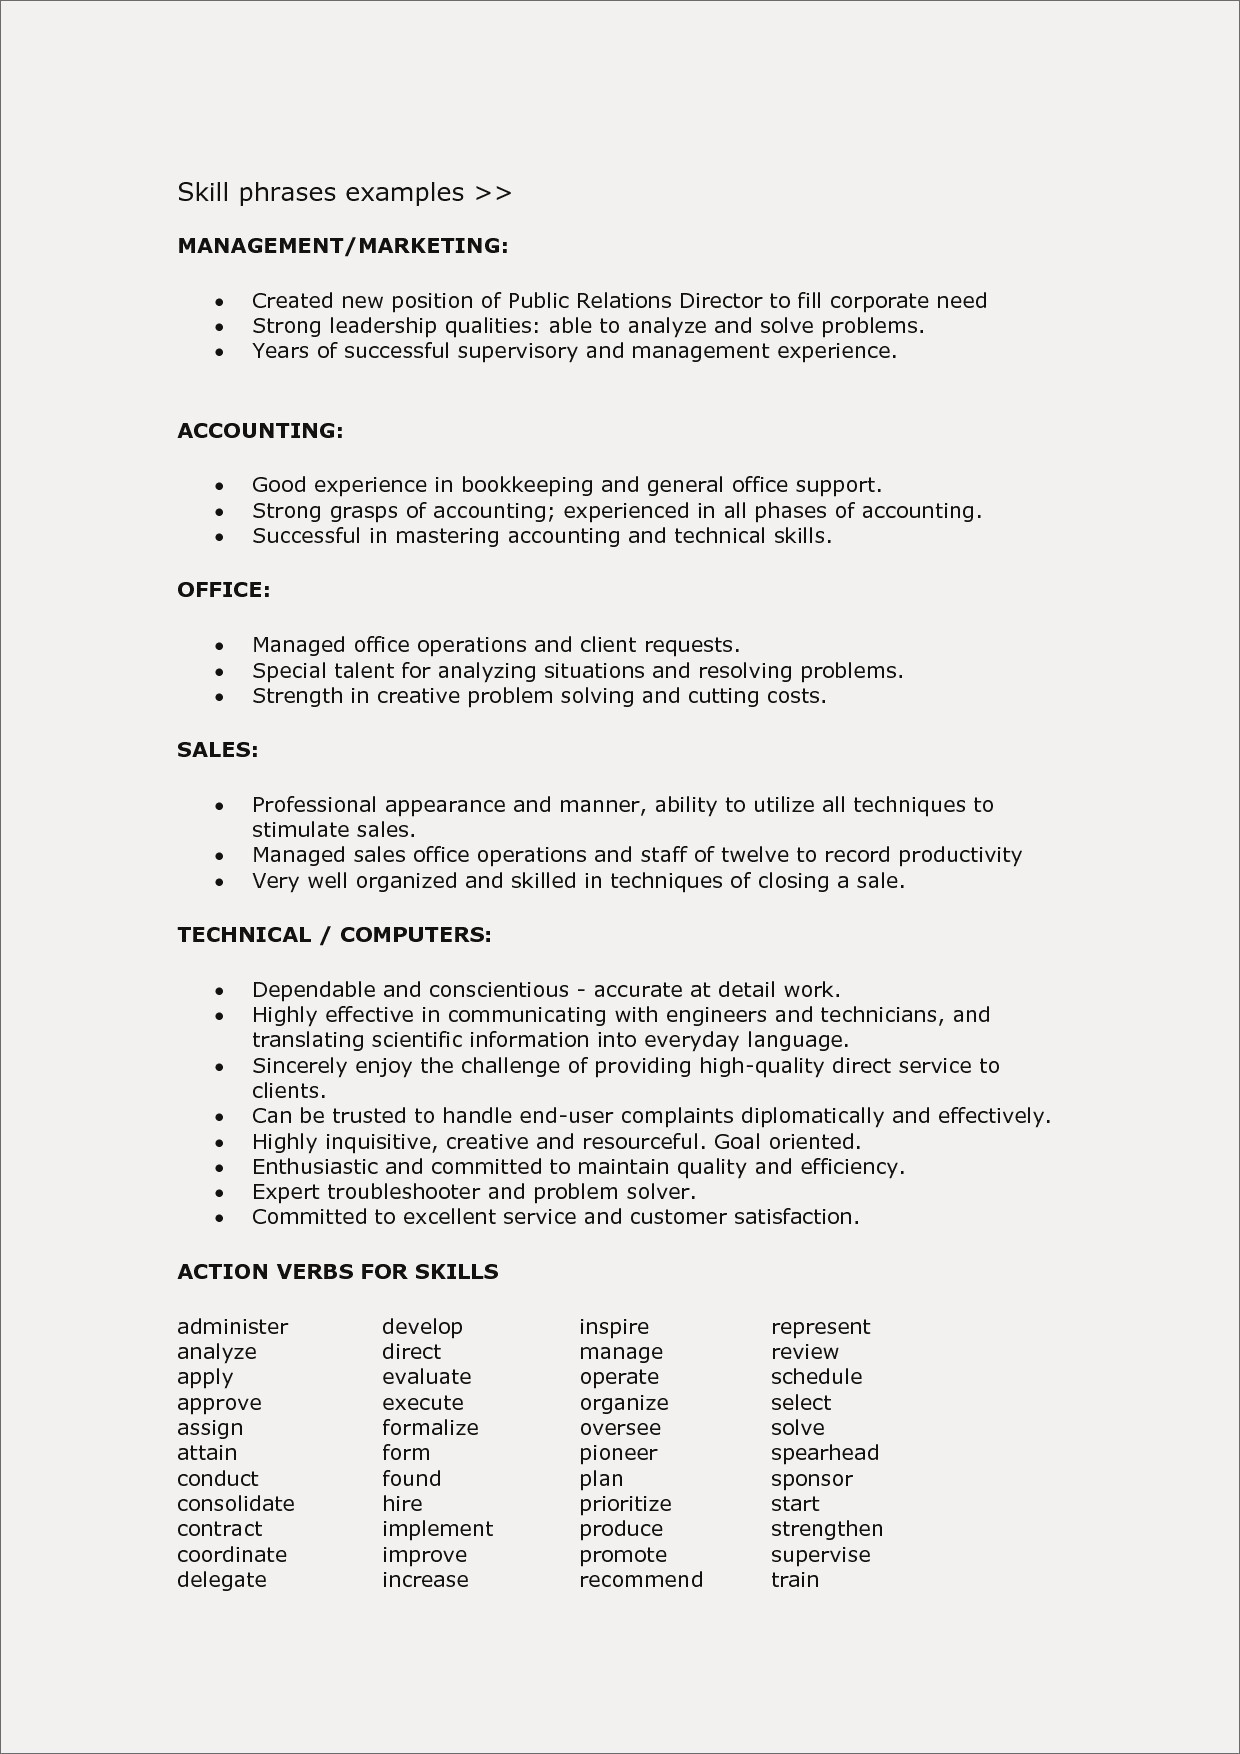 Resume Action Words Customer Service Skills To Put On Resume New 55 Resume Action Words For Customer Service Of Customer Service Skills To Put On Resume resume action words|wikiresume.com